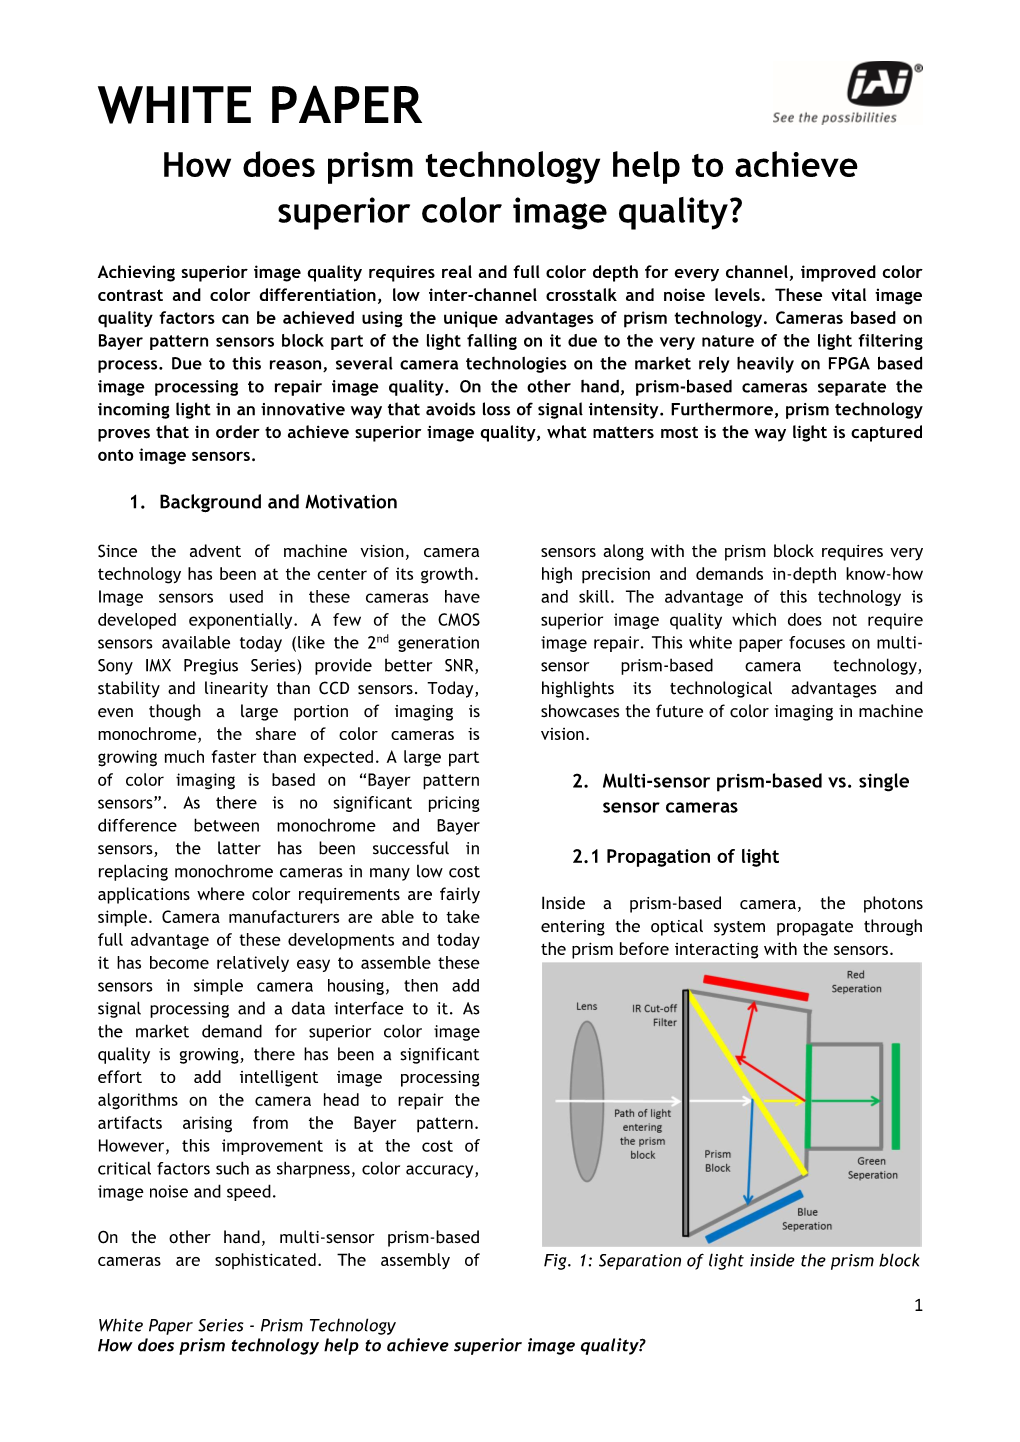 WHITE PAPER How Does Prism Technology Help to Achieve Superior Color Image Quality?